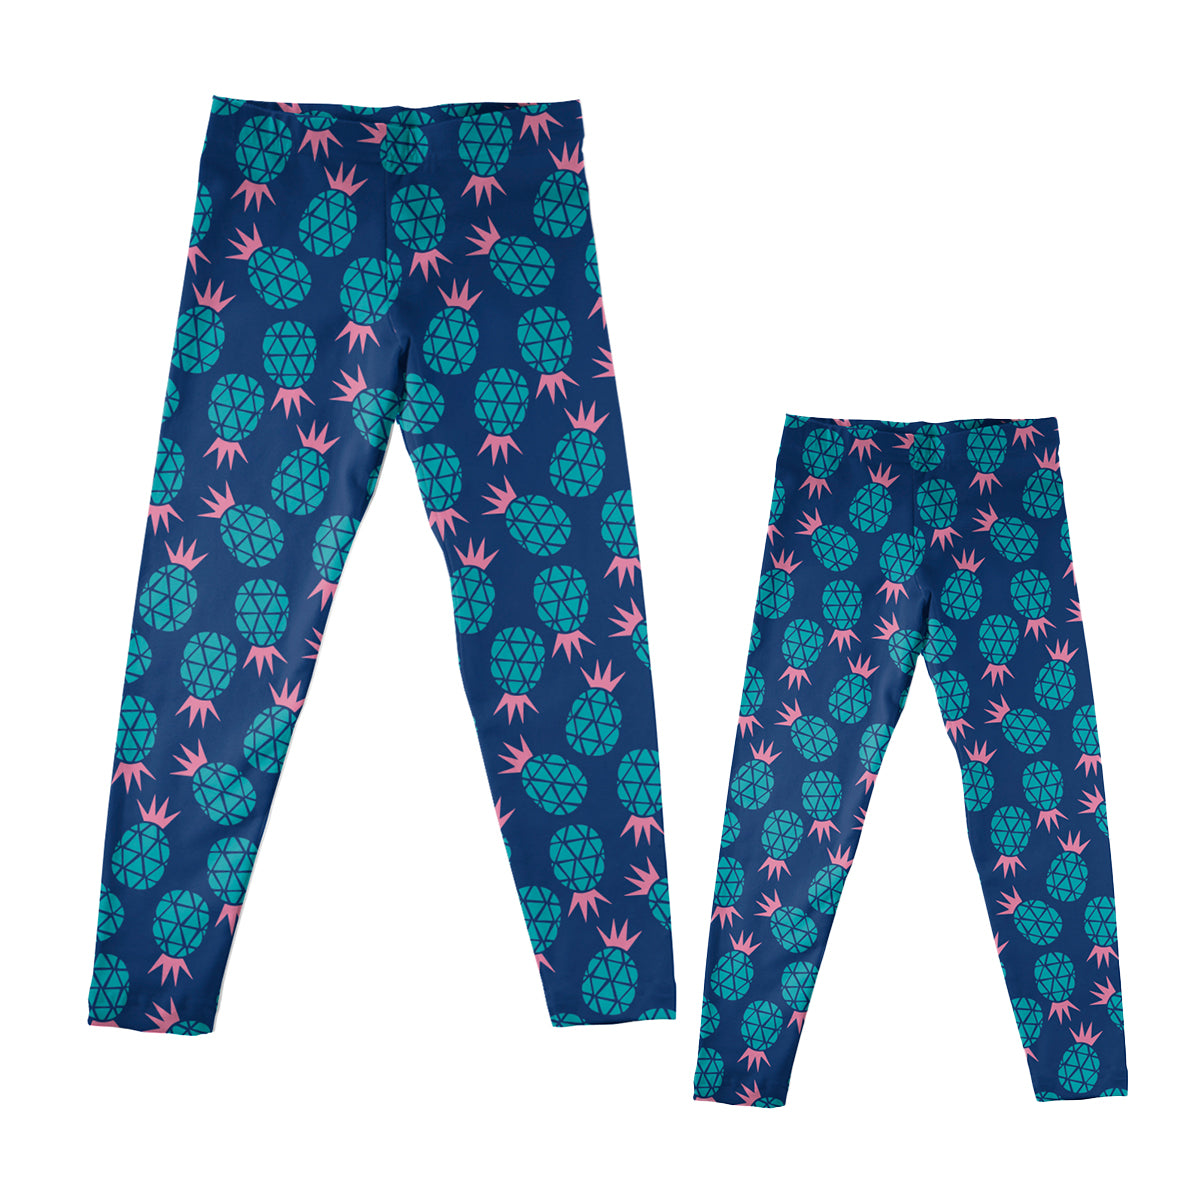 Pineapple Print Navy Turquoise and Pink Leggings - Wimziy&Co.